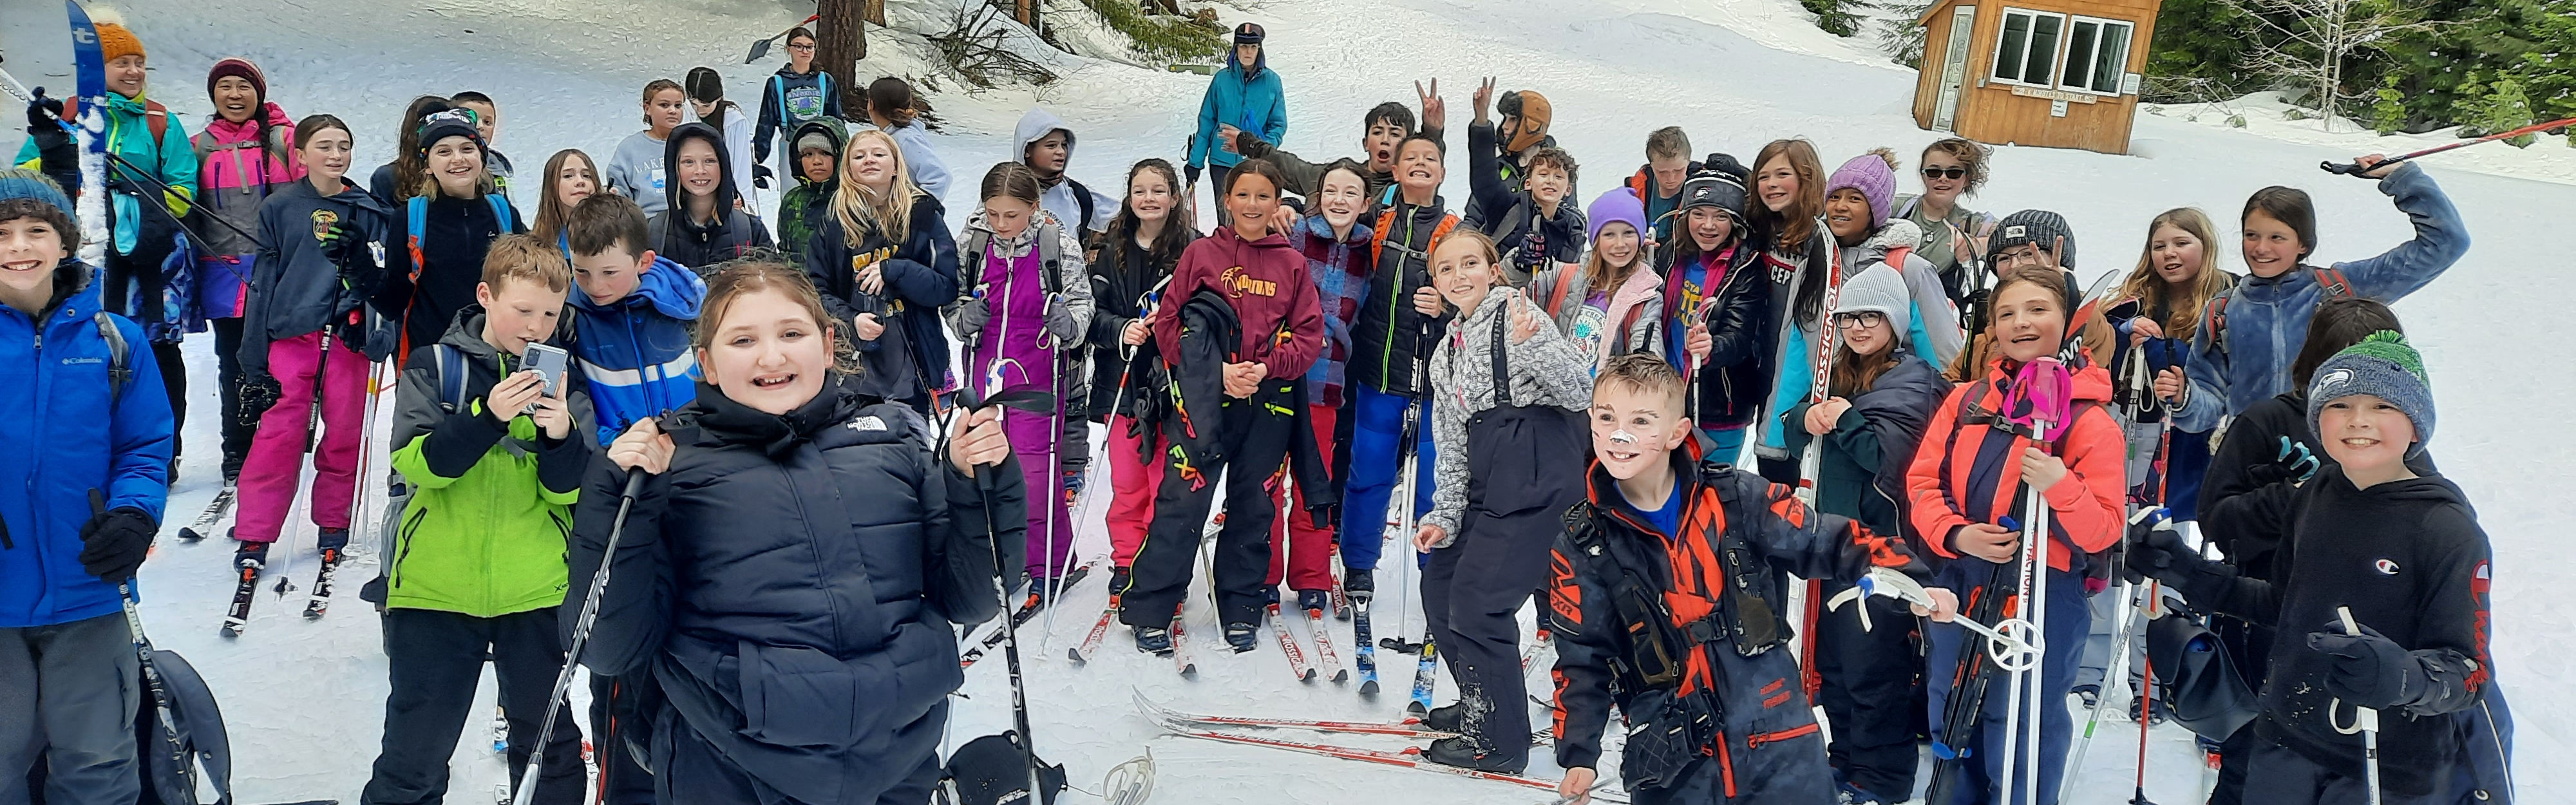 5th graders on the cross country ski trip